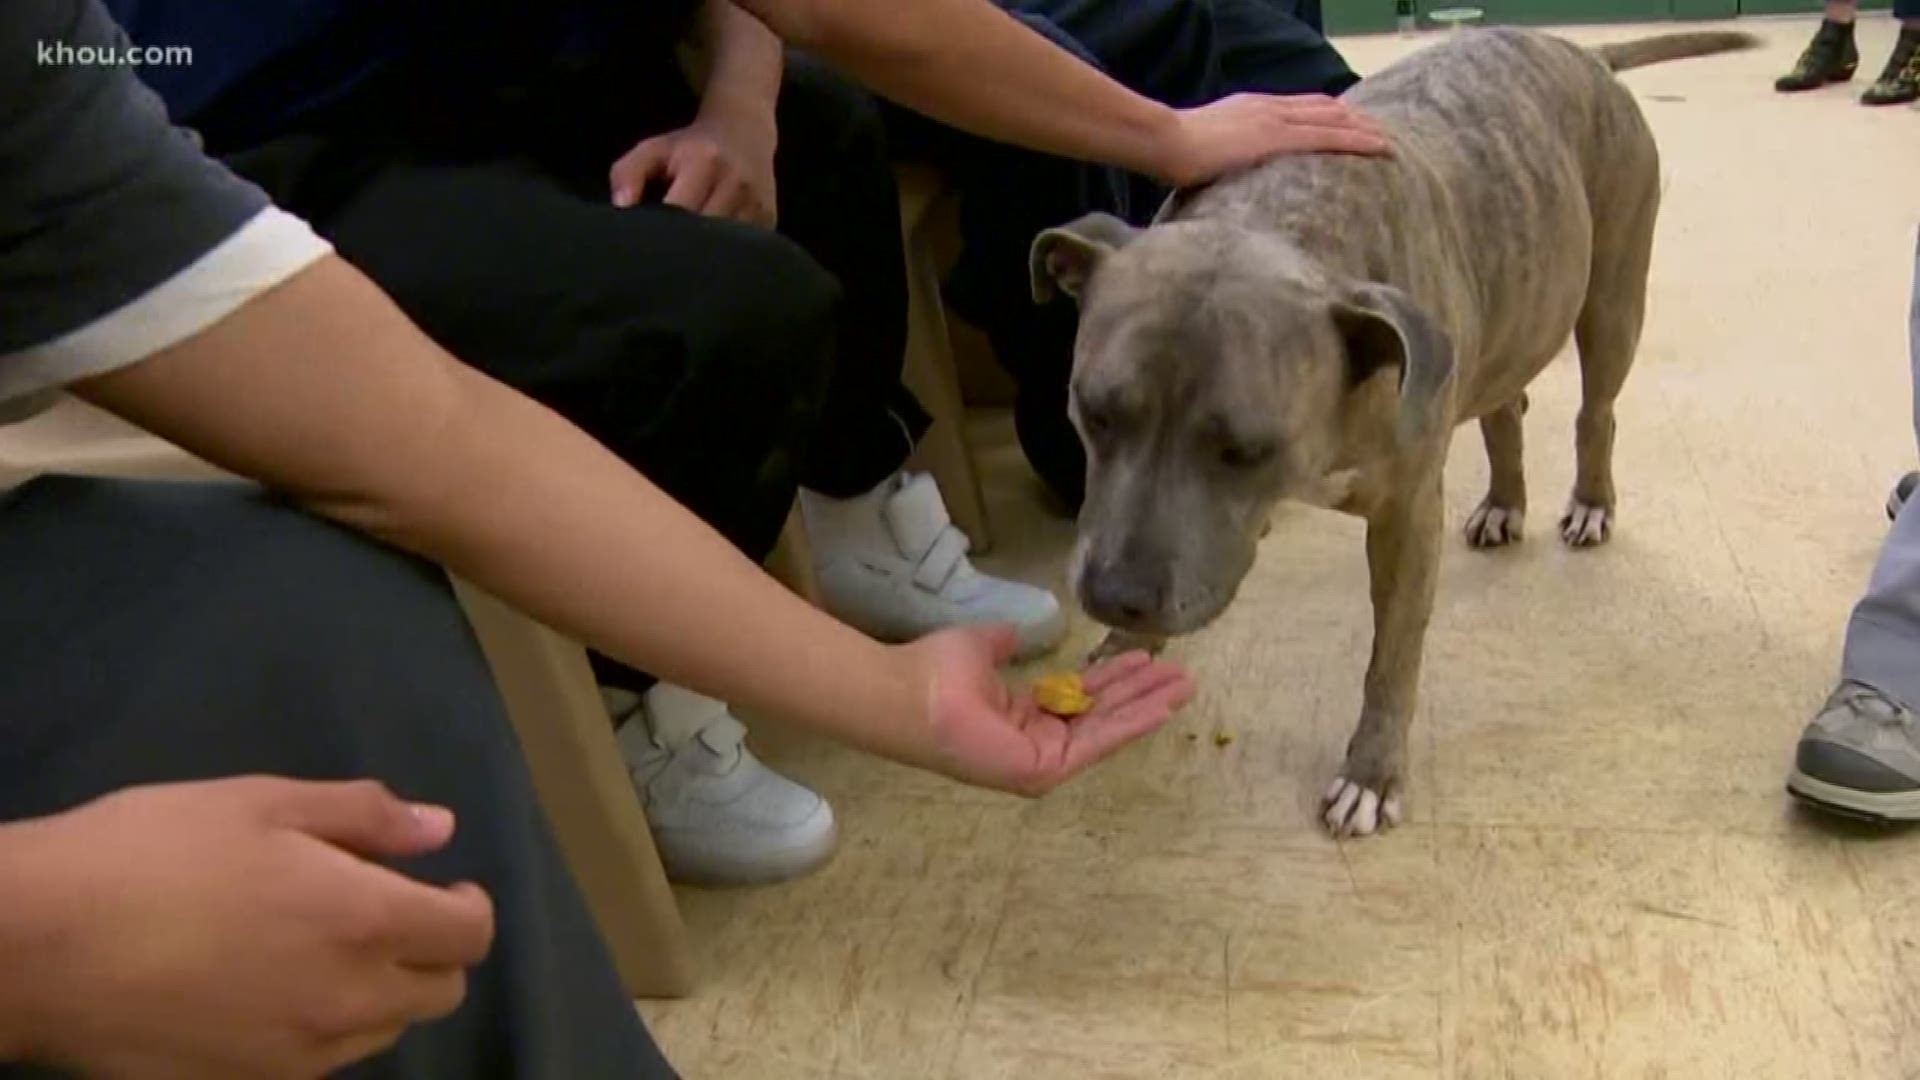 In this week's HTownTails, we're talking about second chances. It's something a group of teenagers are working hard for, and they're getting help from a rescue dog who's healing hearts one therapy session at a time.